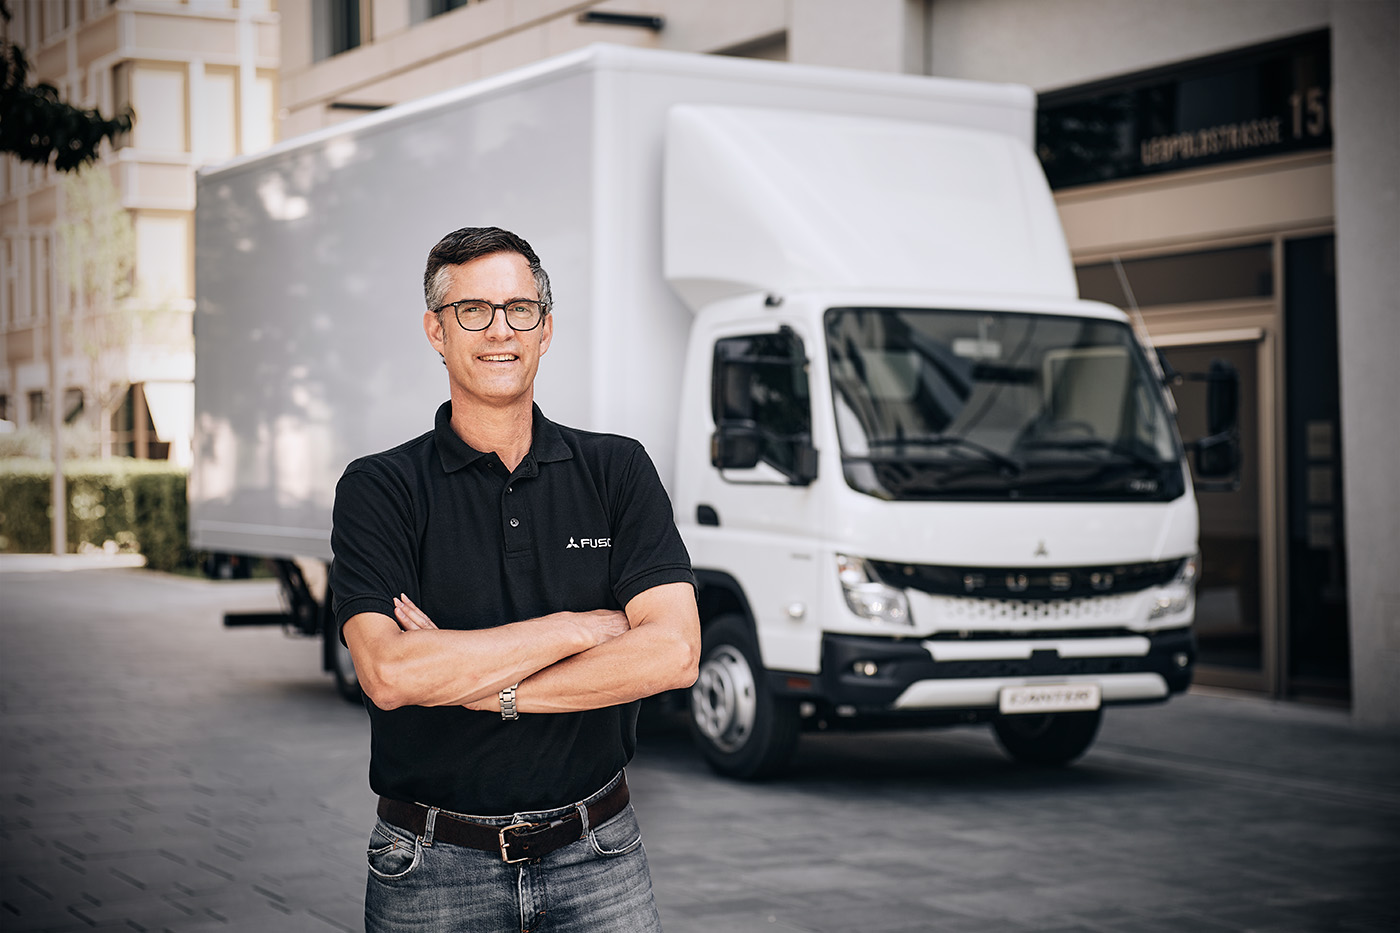 With FUSO Europe, the brand and the Canter got a new sales organisation in Germany about 20 years ago as part of Daimler Trucks. Erk Roennefarth, now Head of Marketing & Product Management Europe, has been with the company since then - and knows a thing or two about exotics, pioneering work and Canter love.